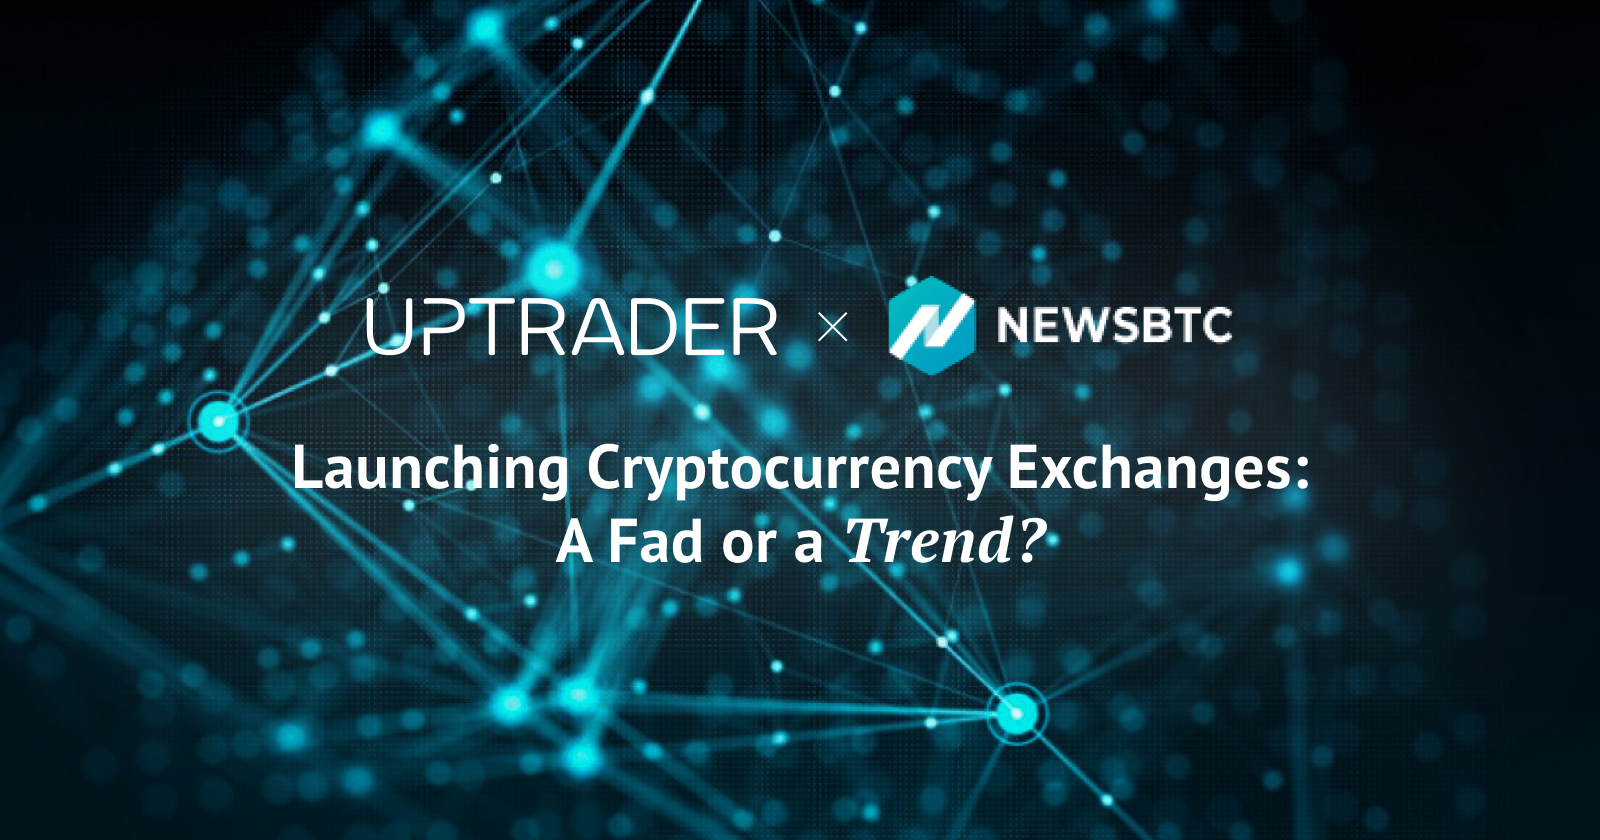 Launching Cryptocurrency Exchanges: A Fad or a Trend?